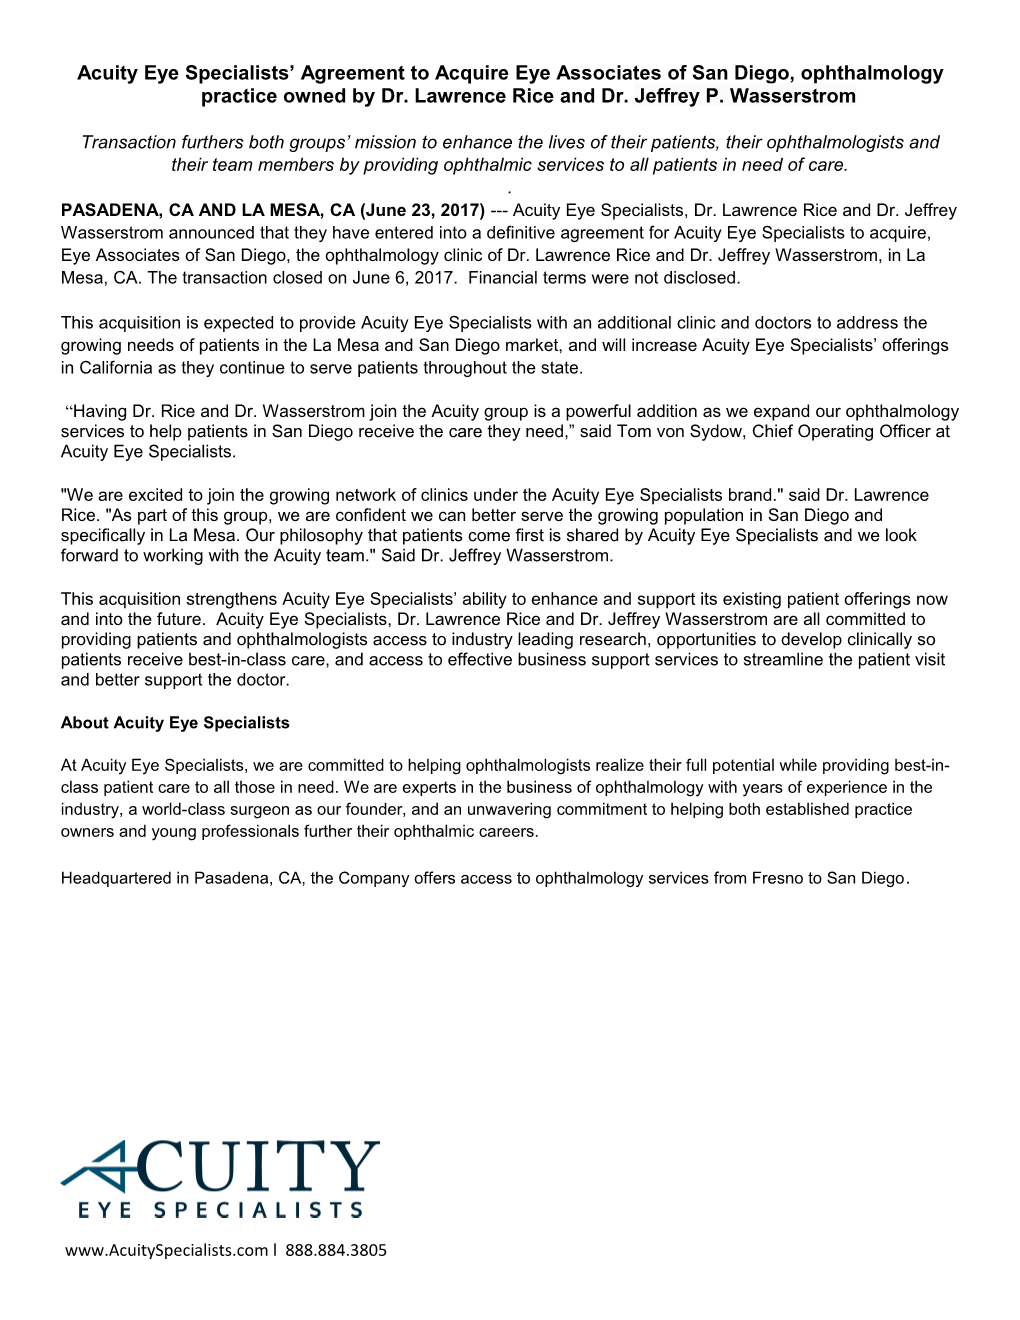 Acuity Eye Specialists Agreement to Acquire Eye Associates of San Diego, Ophthalmology